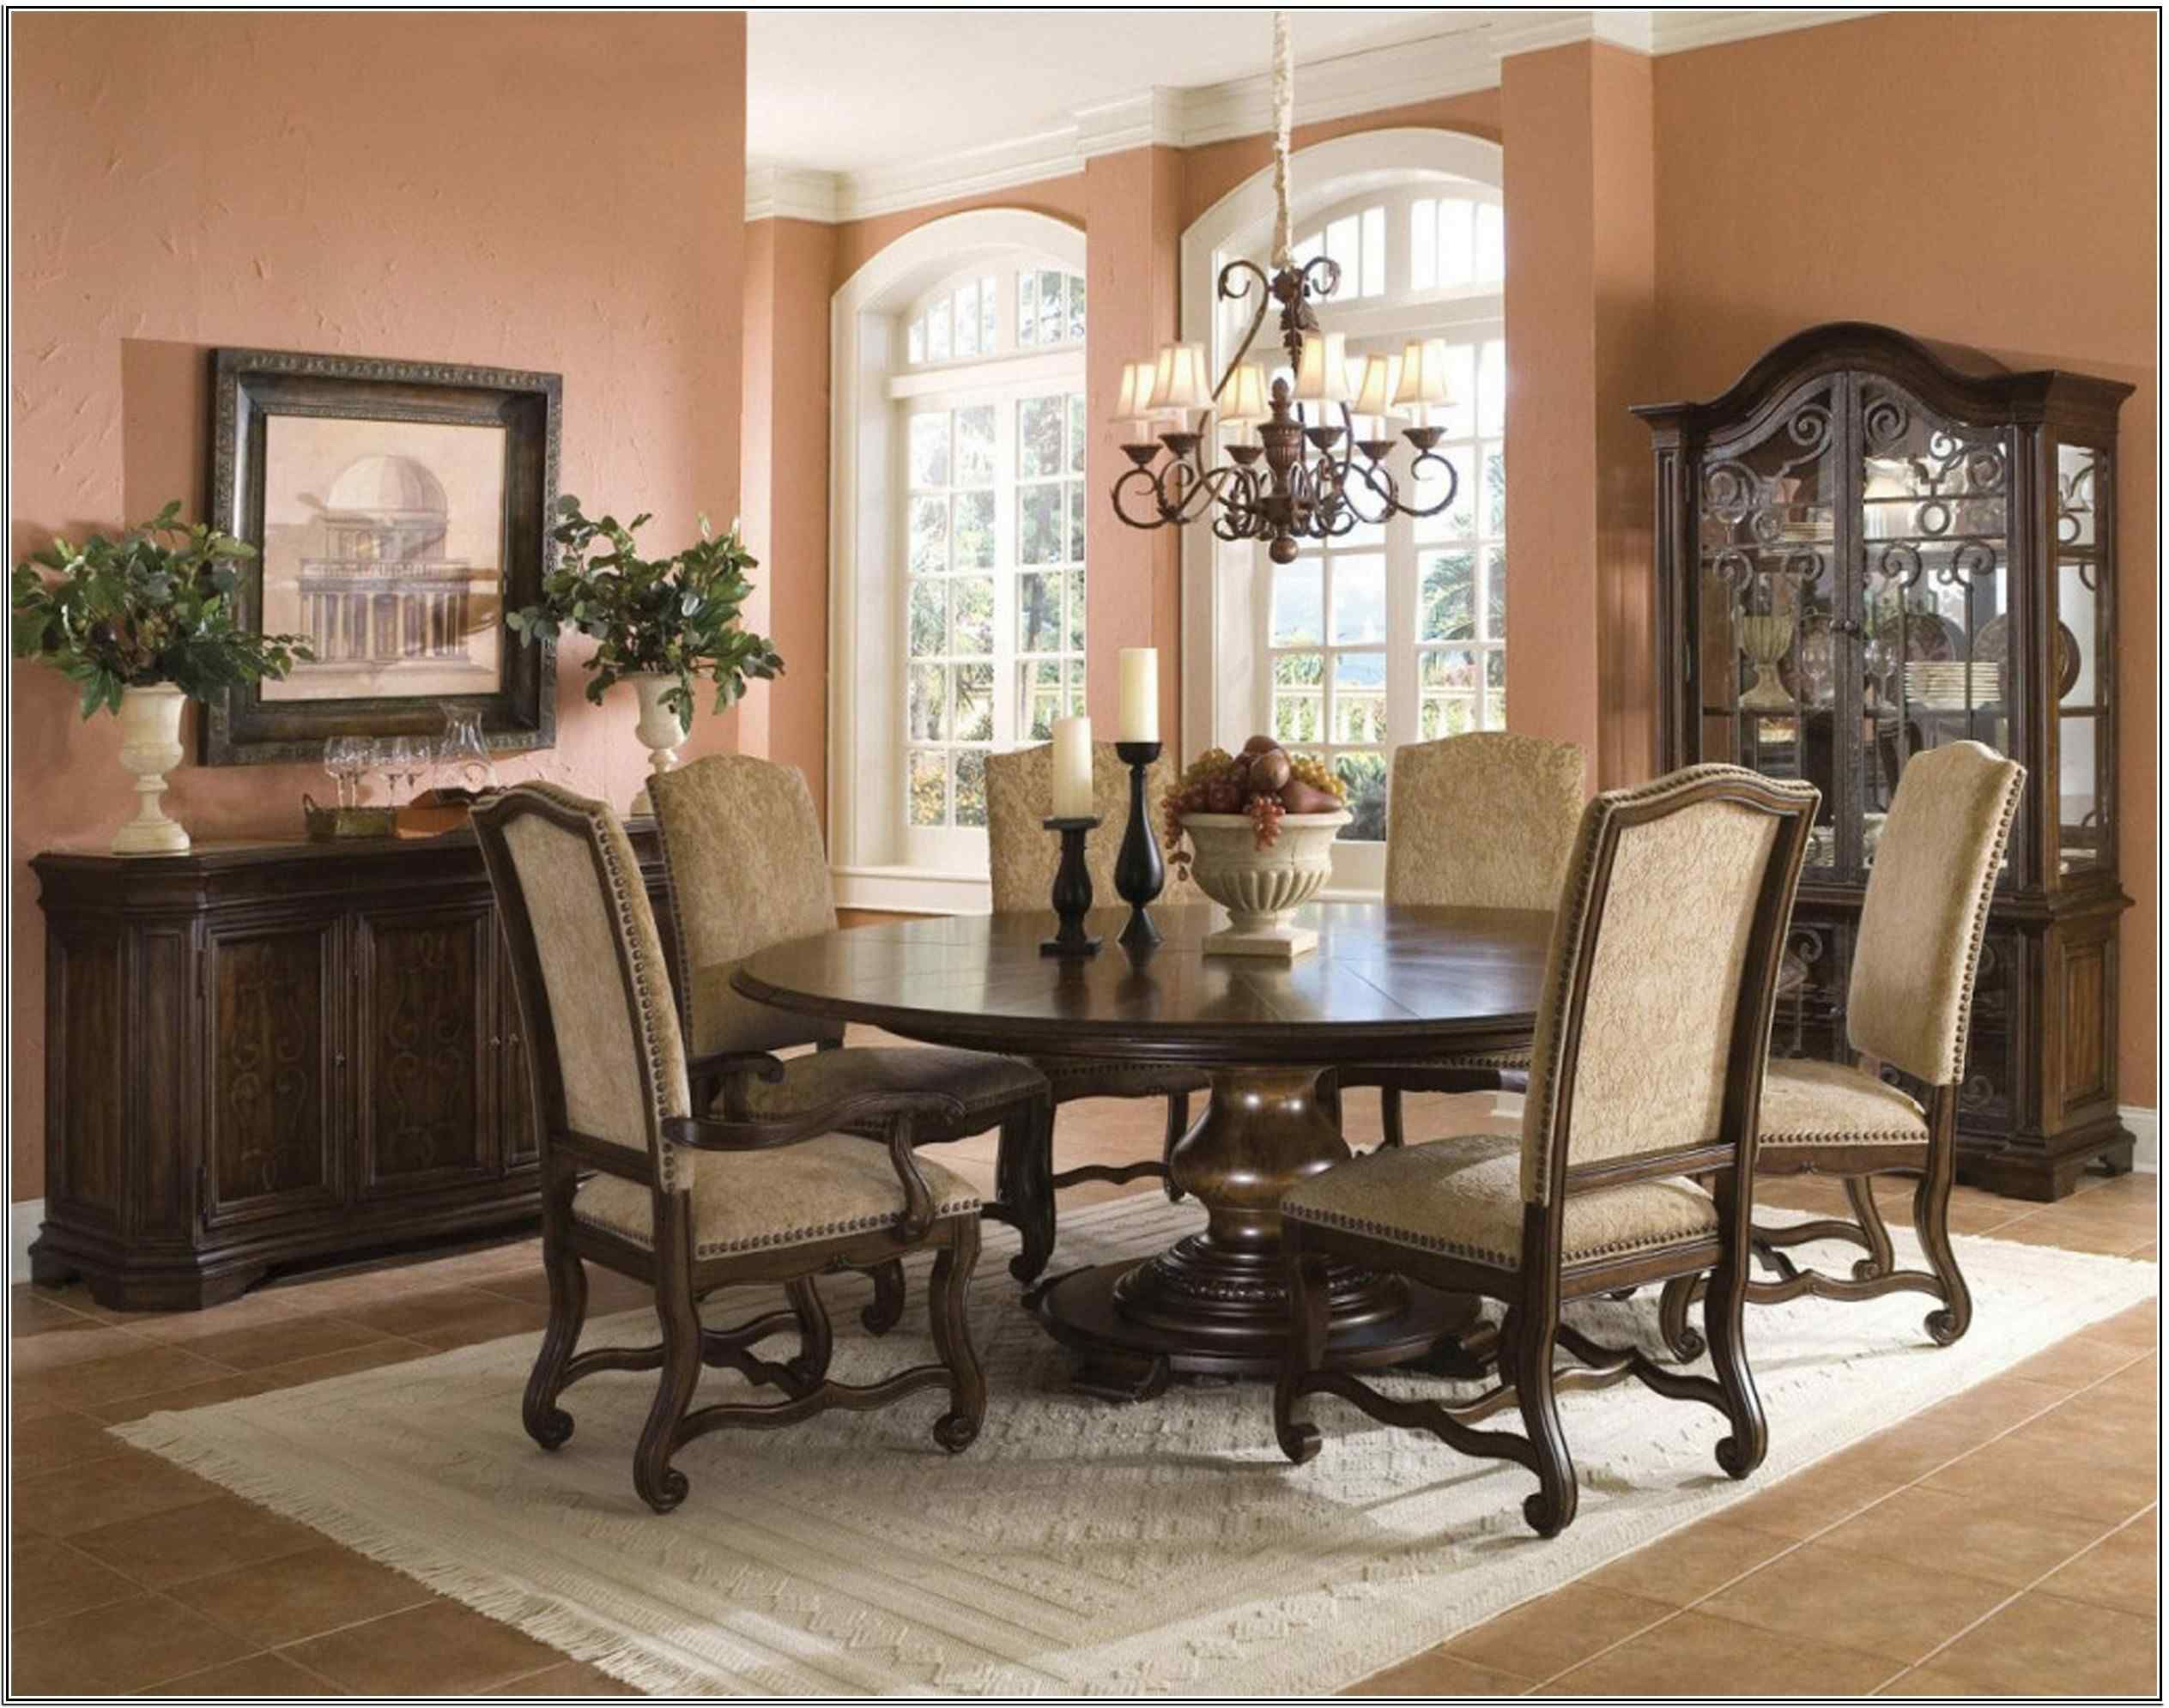 Dining Room Table Centerpiece Ideas Everyday Simple Best with regard to sizing 2527 X 1990